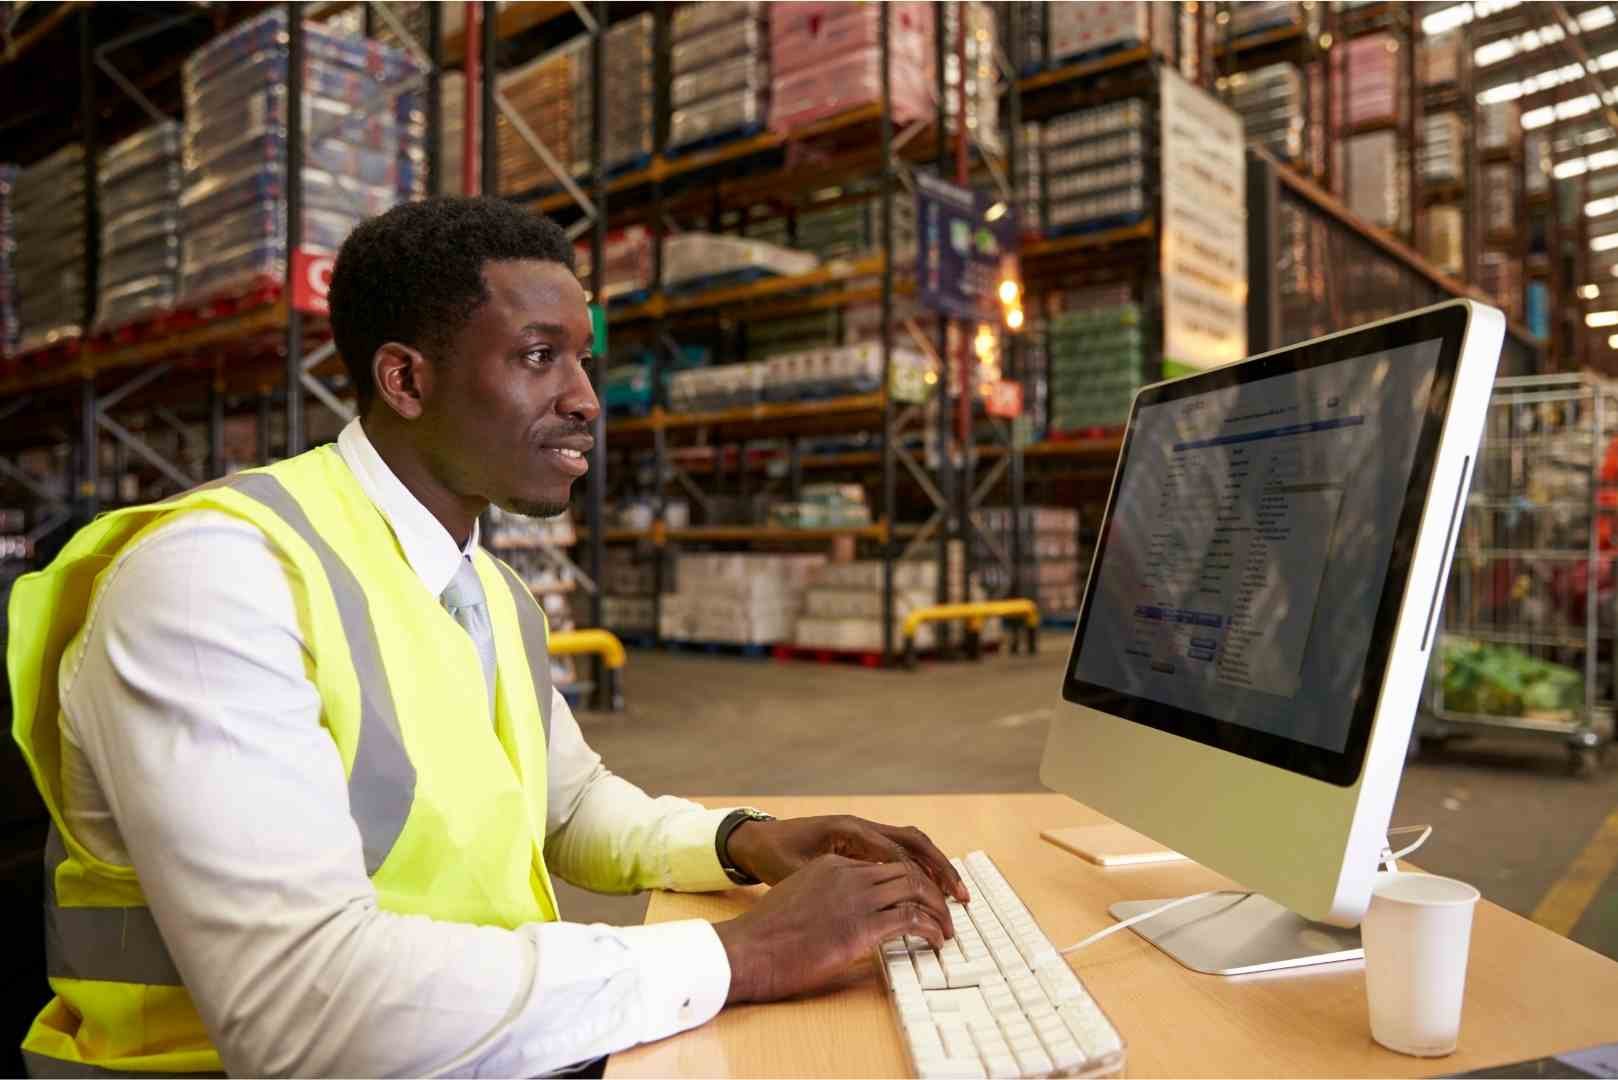 Warehouse manager looking at reports